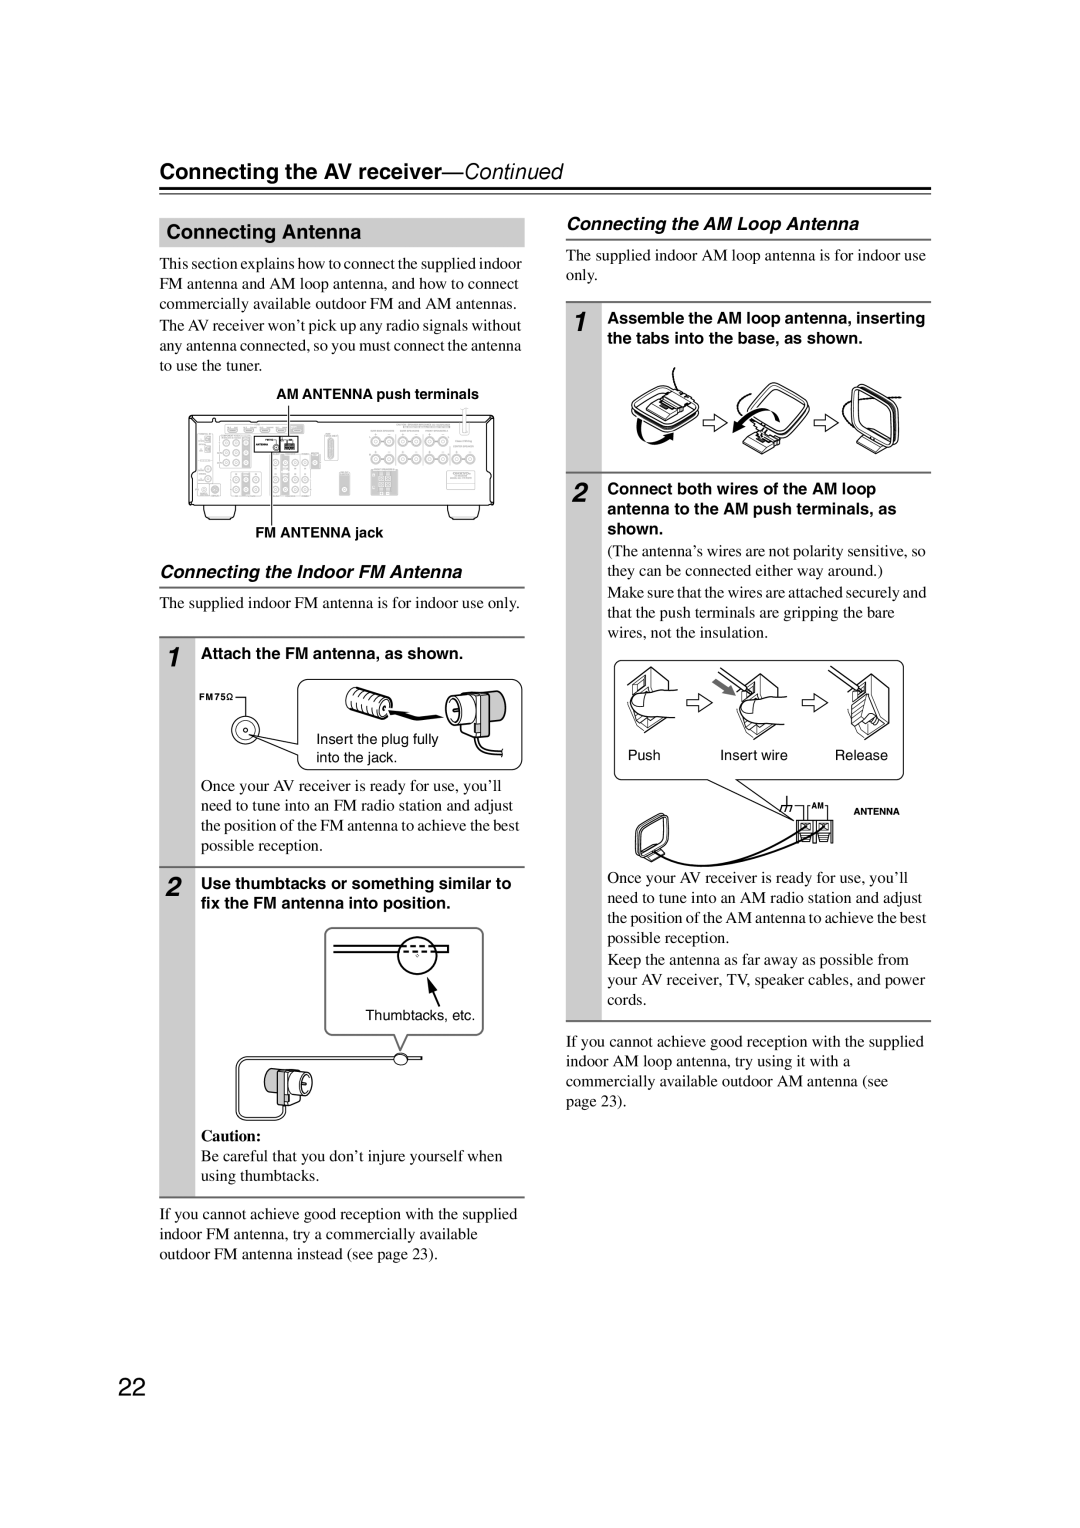 Onkyo HT-S5200 instruction manual Connecting Antenna, Connecting the Indoor FM Antenna, Connecting the AM Loop Antenna 